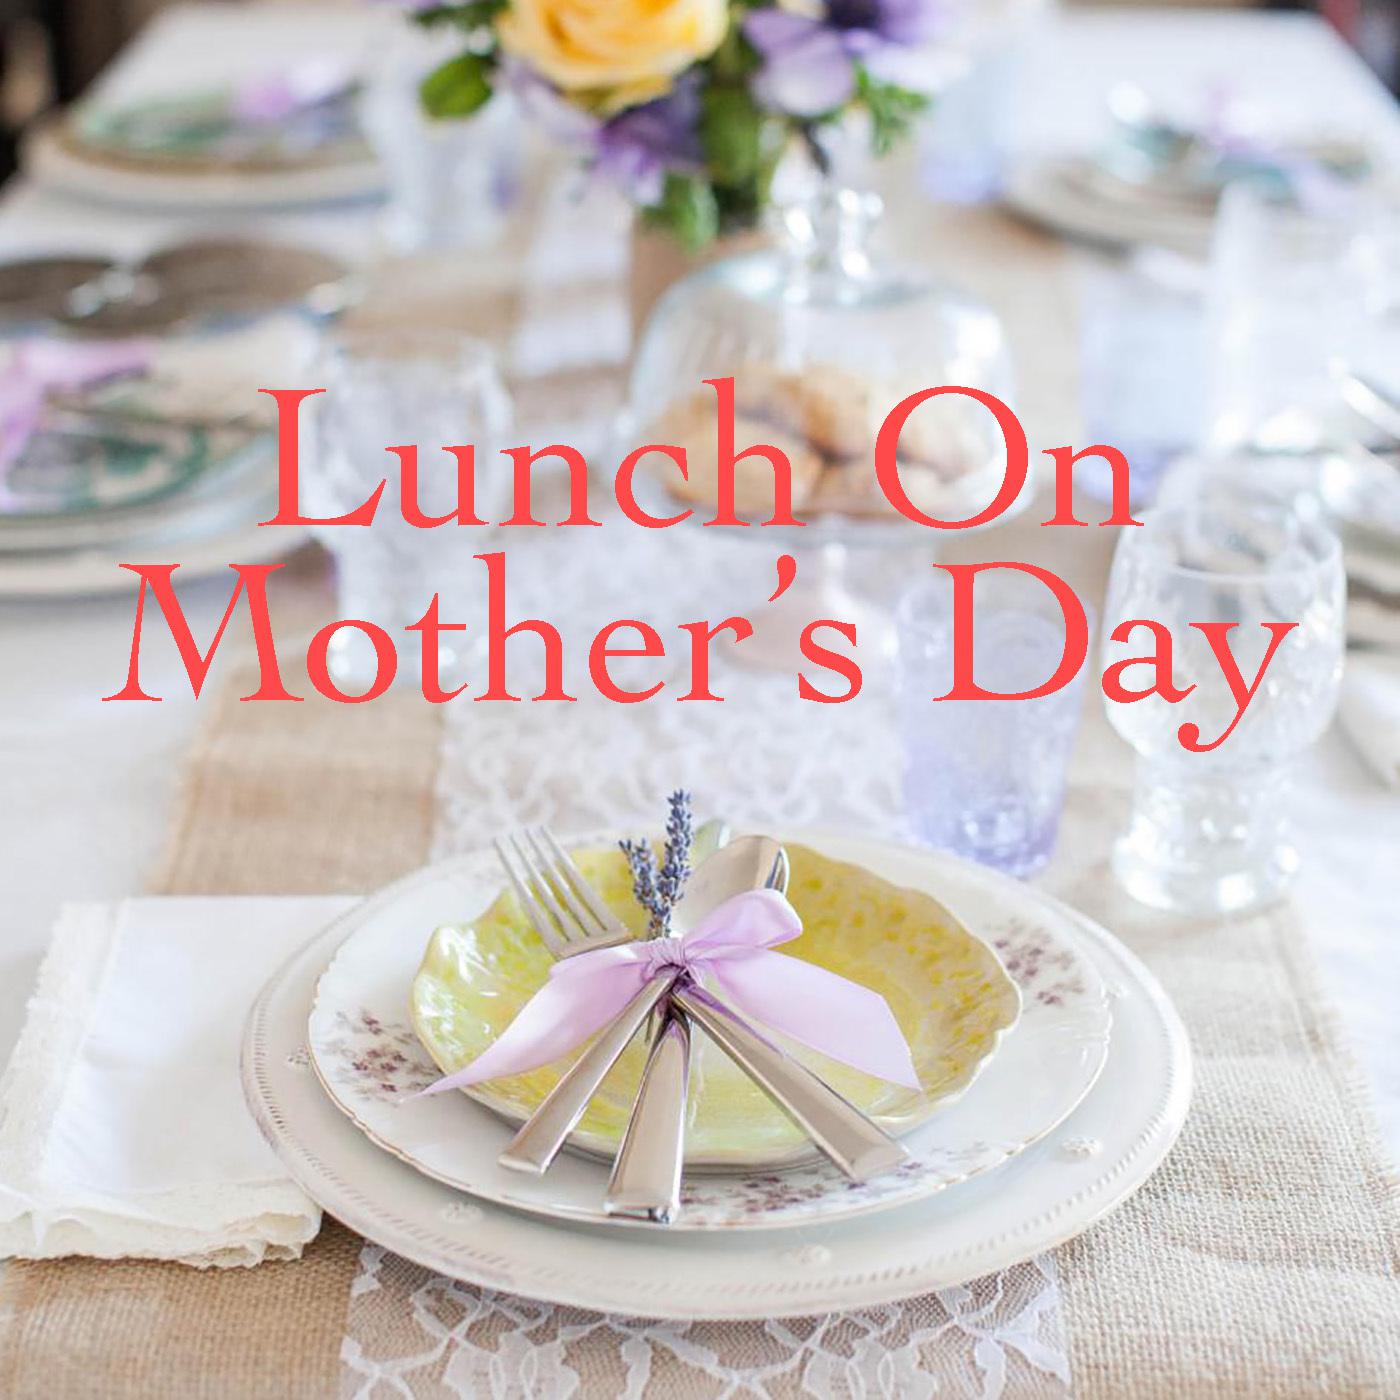 Lunch On Mother's Day